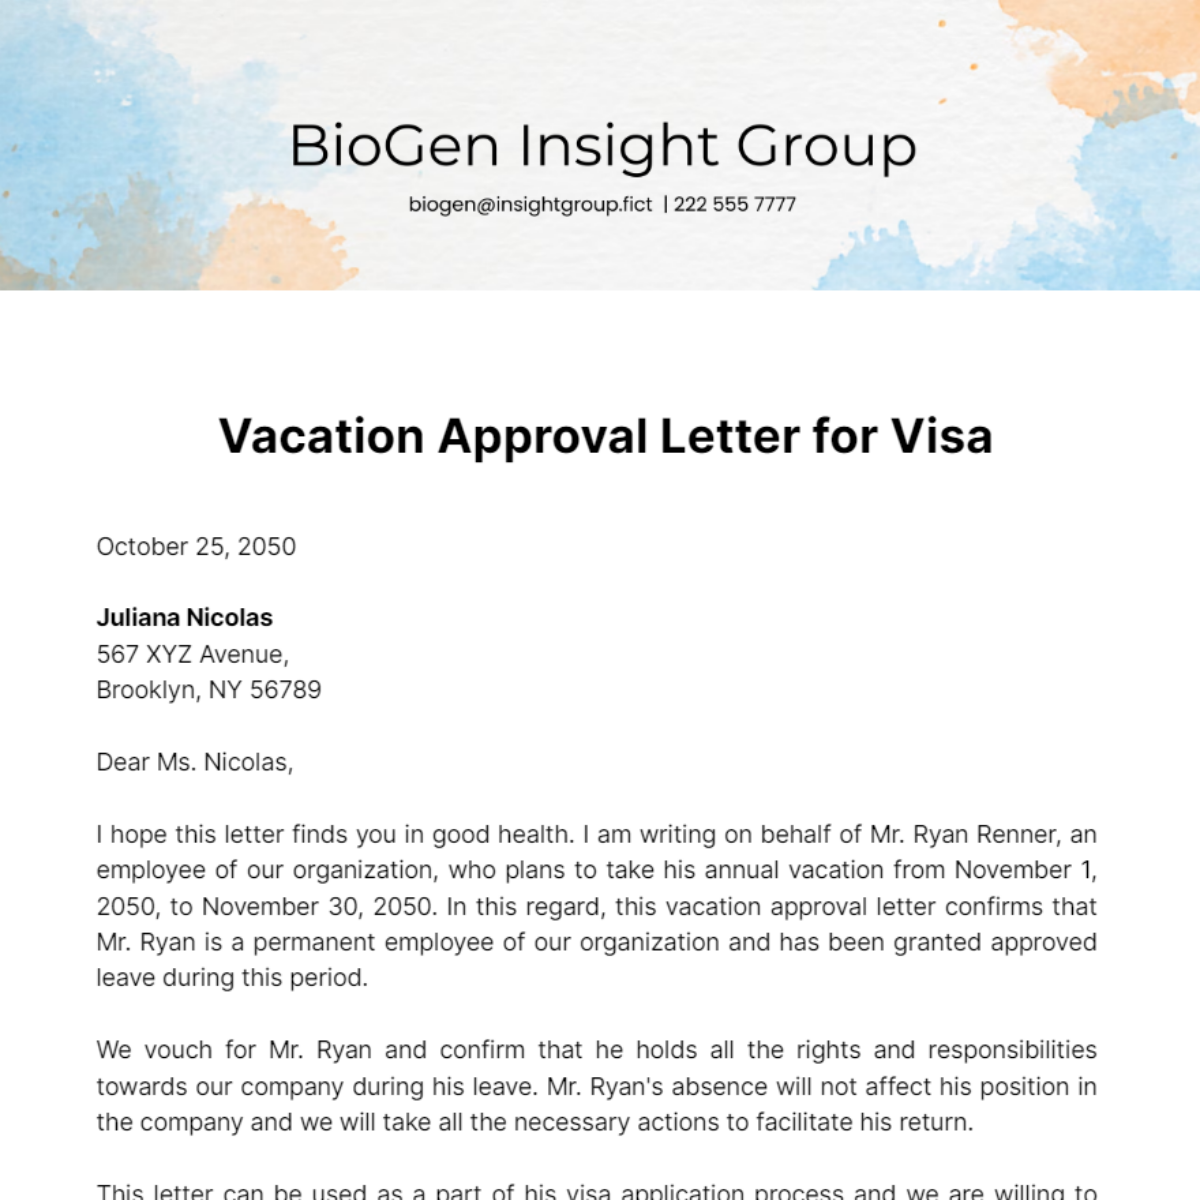 Vacation Approval Letter for Visa Template